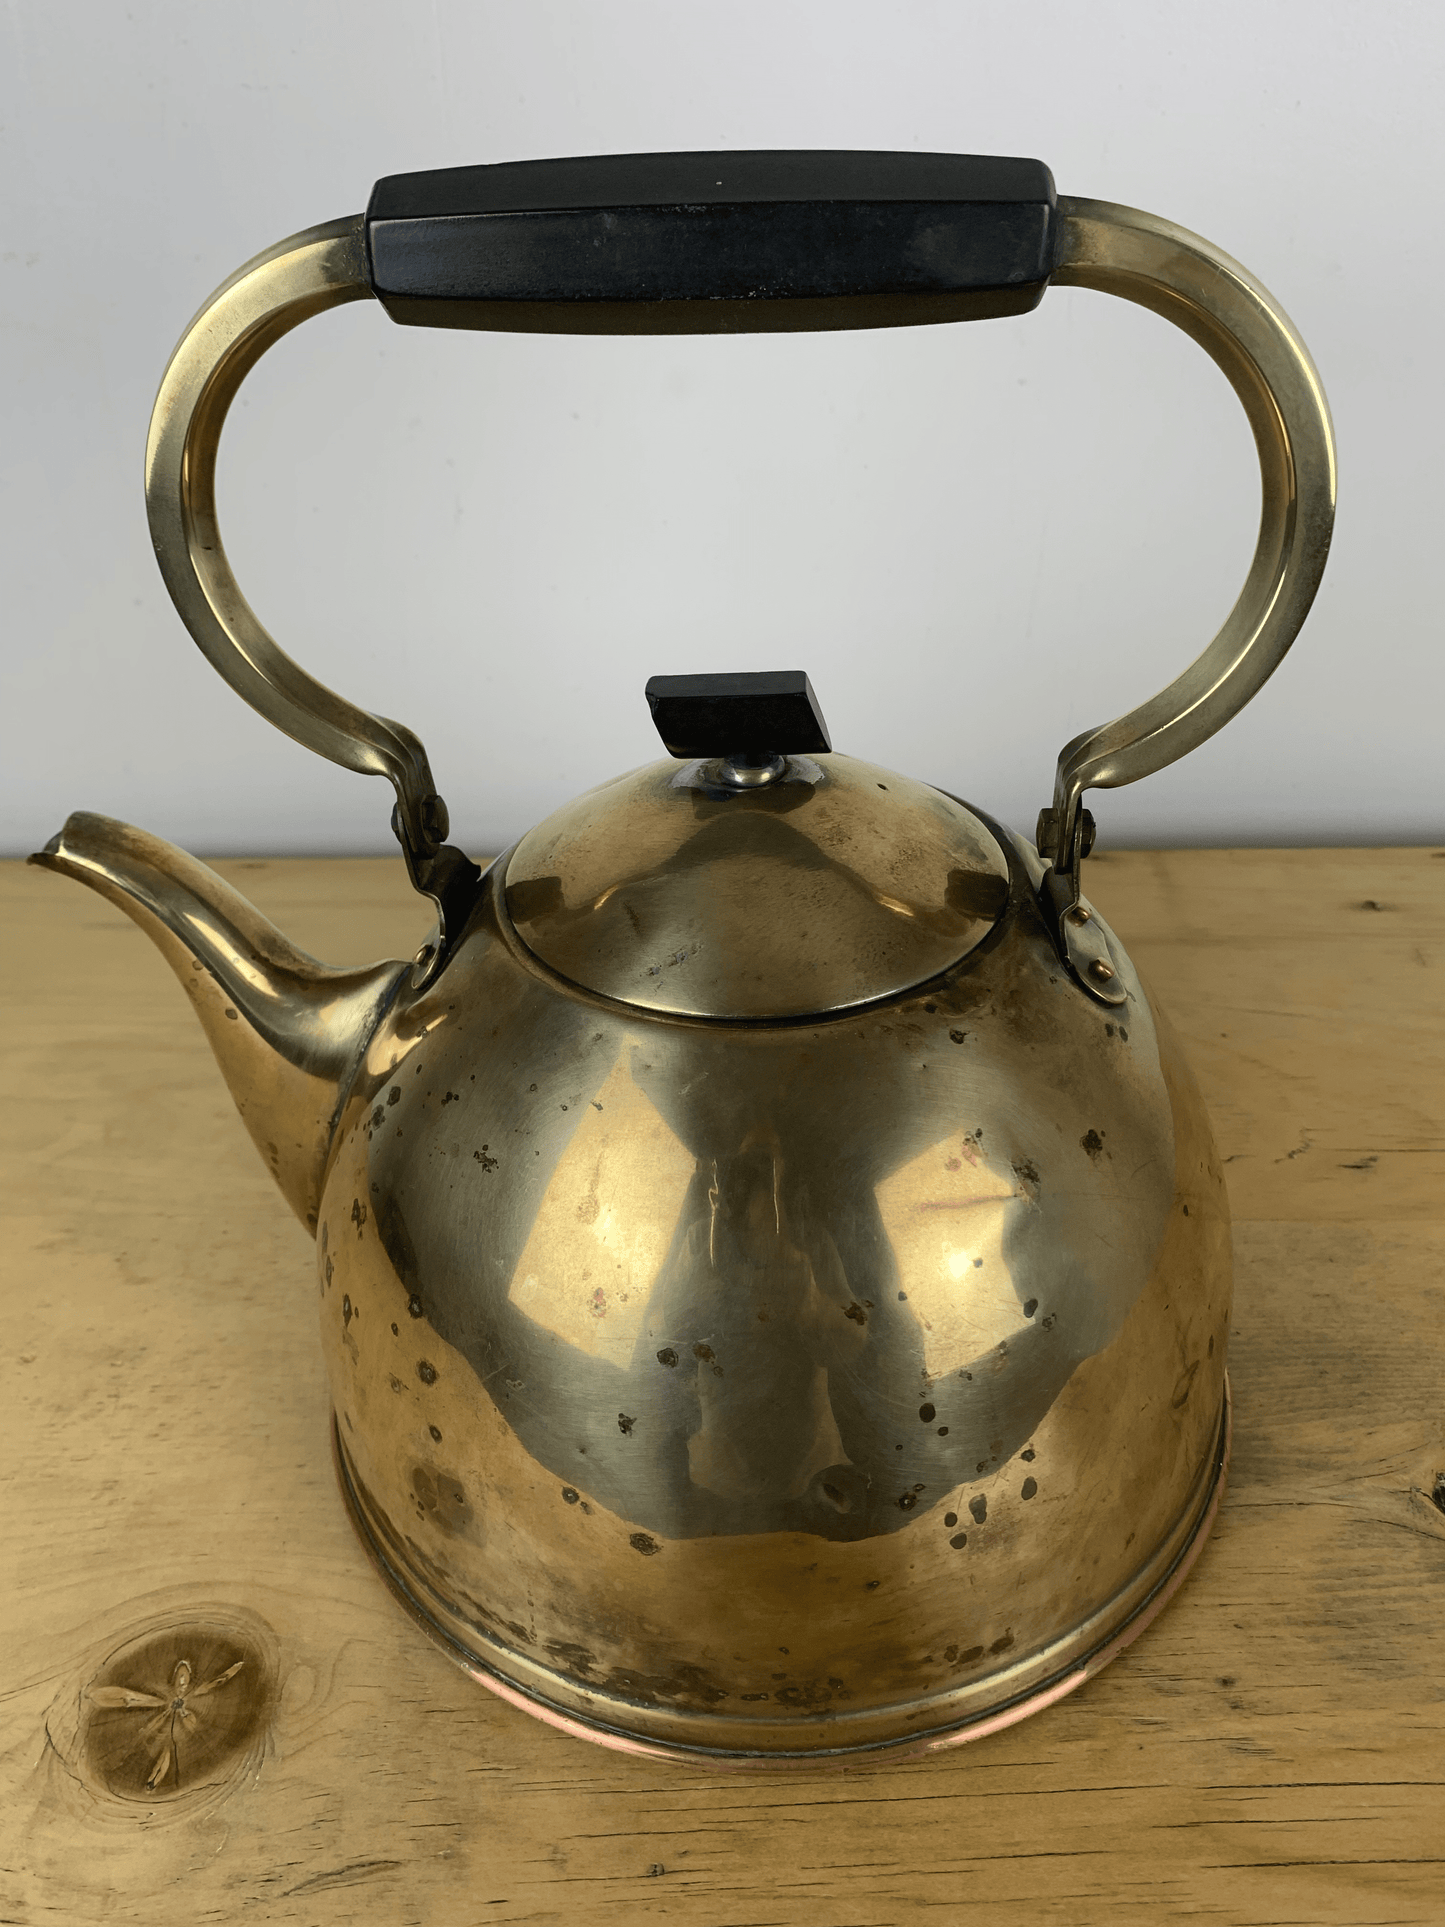 Vintage Brass Kettle: Timeless Elegance for Your Tea Rituals